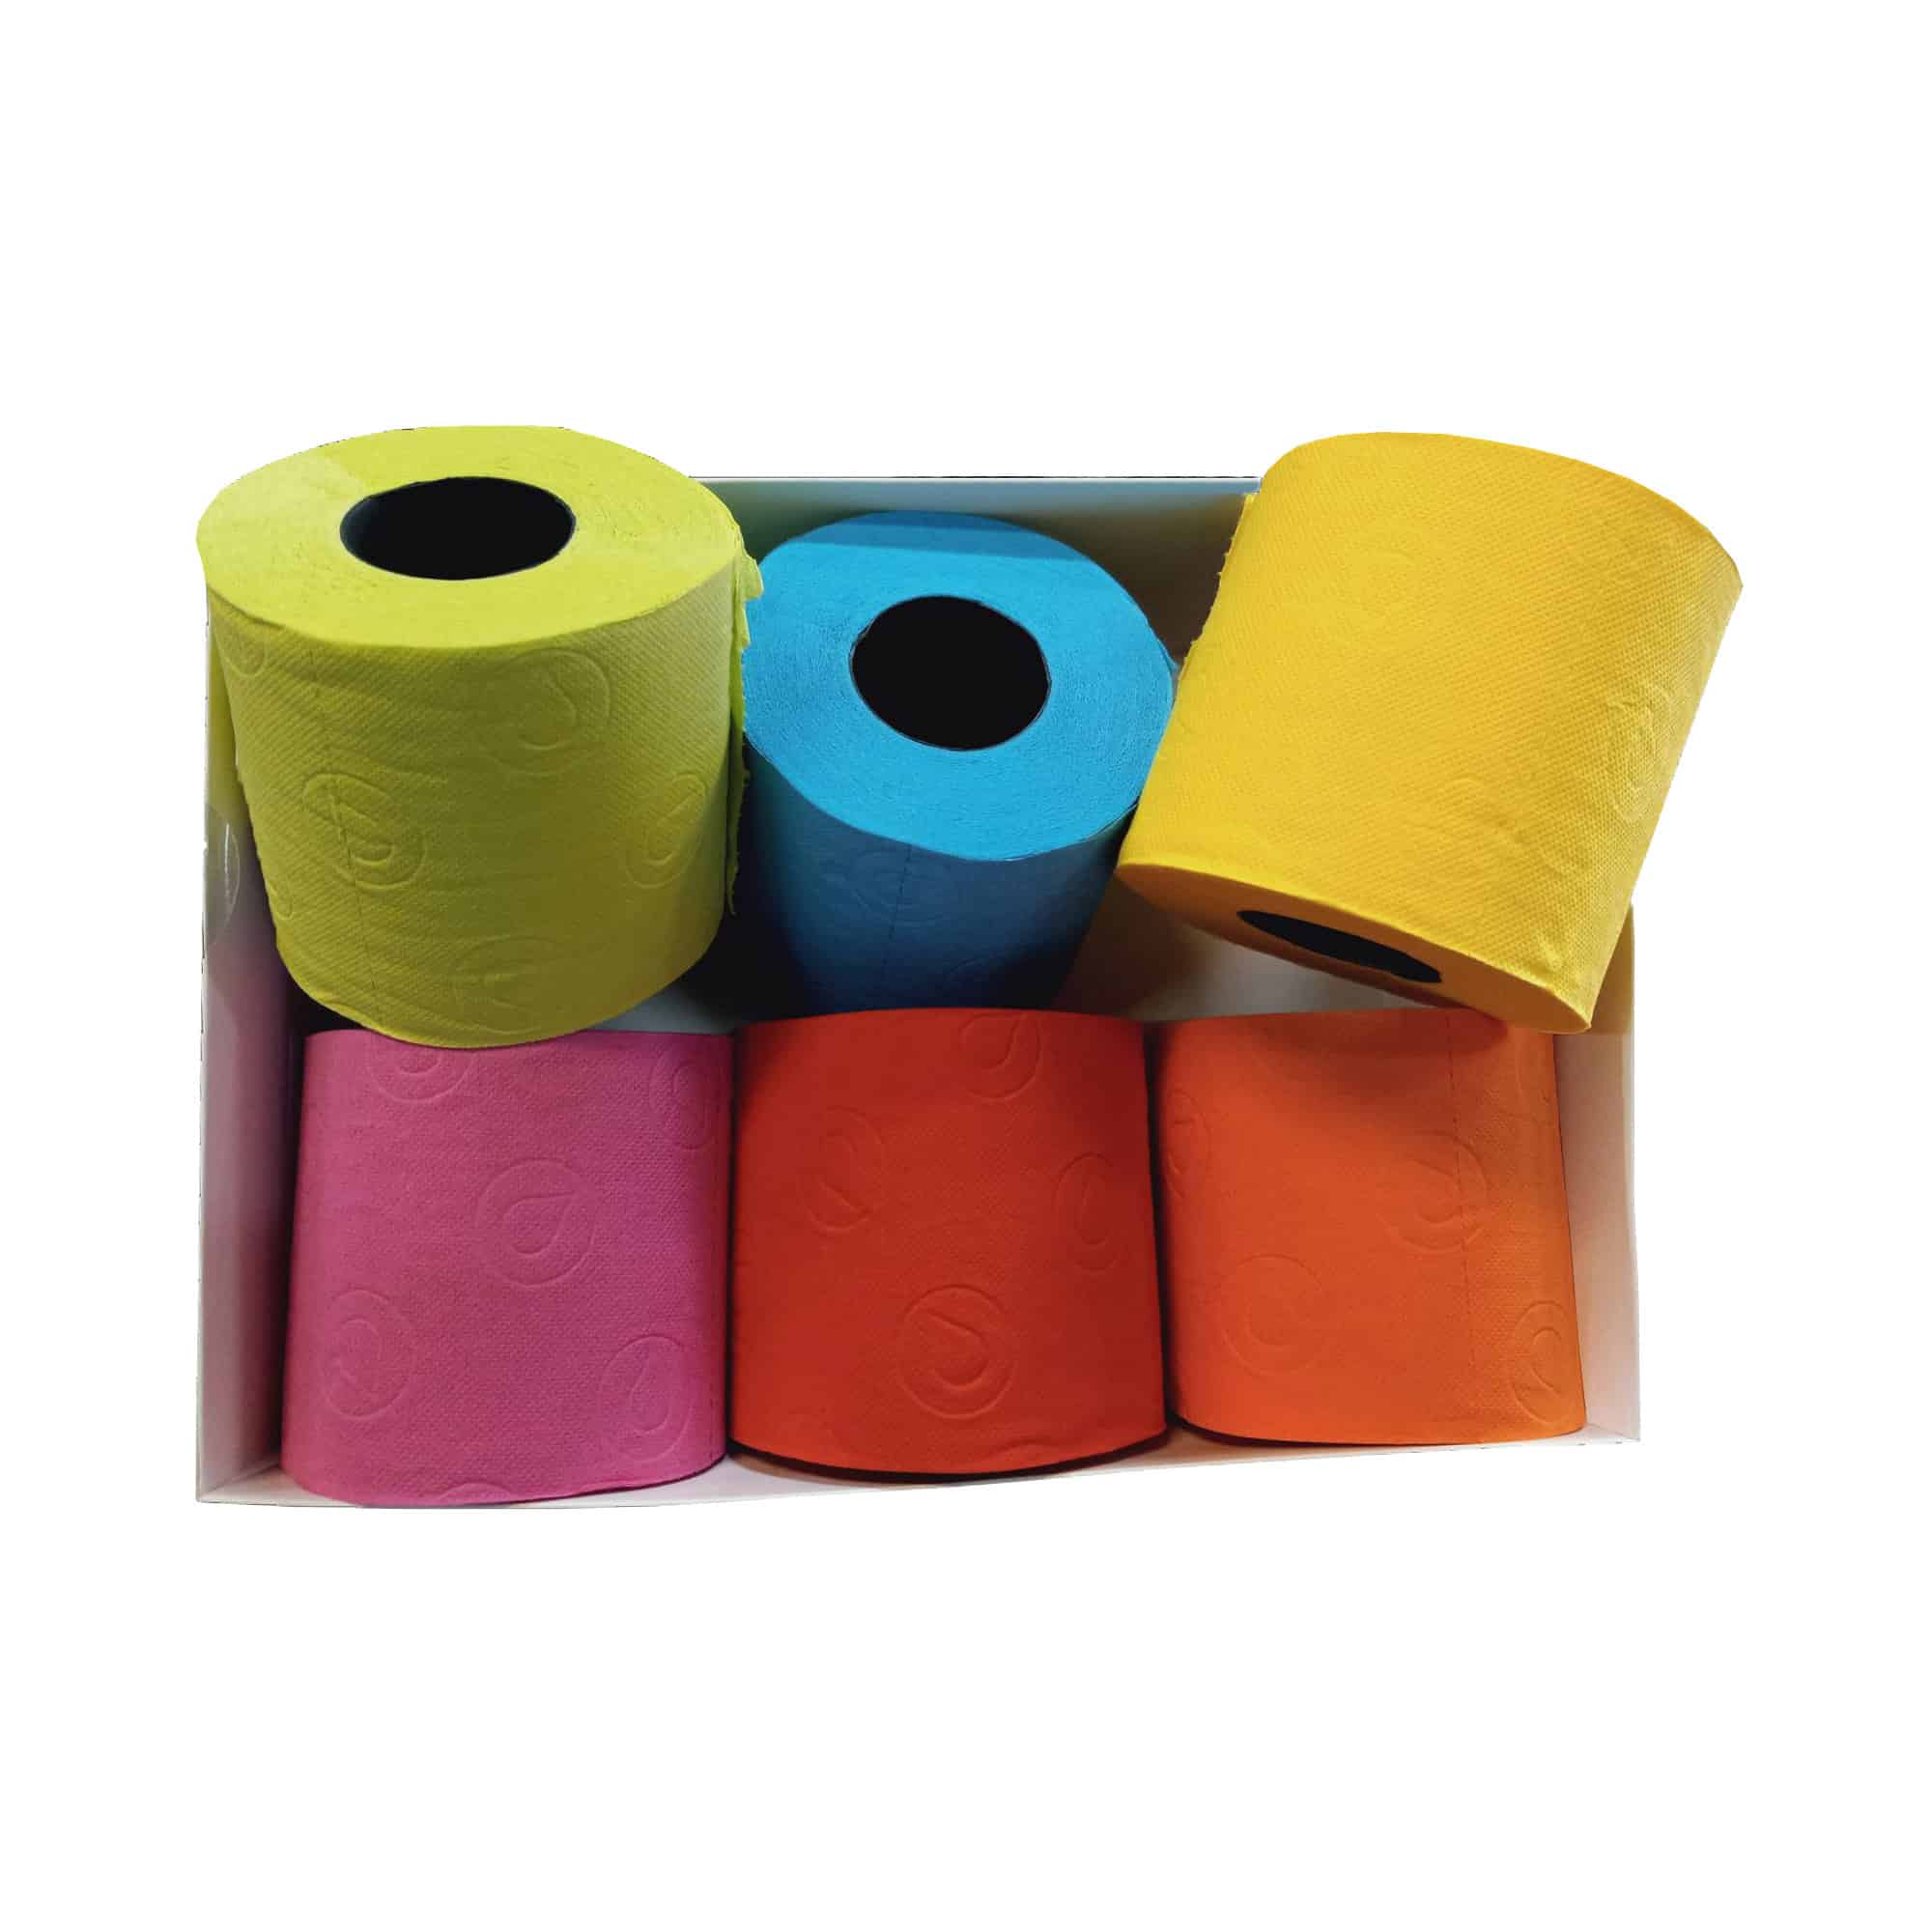 https://roll-lux.com/wp-content/uploads/2020/04/RK200074666-Gift-Box-Toilet-Paper-3-Ply-6-Multicolor-Rolls-140-Premium-Quality-Sheets-2.jpg